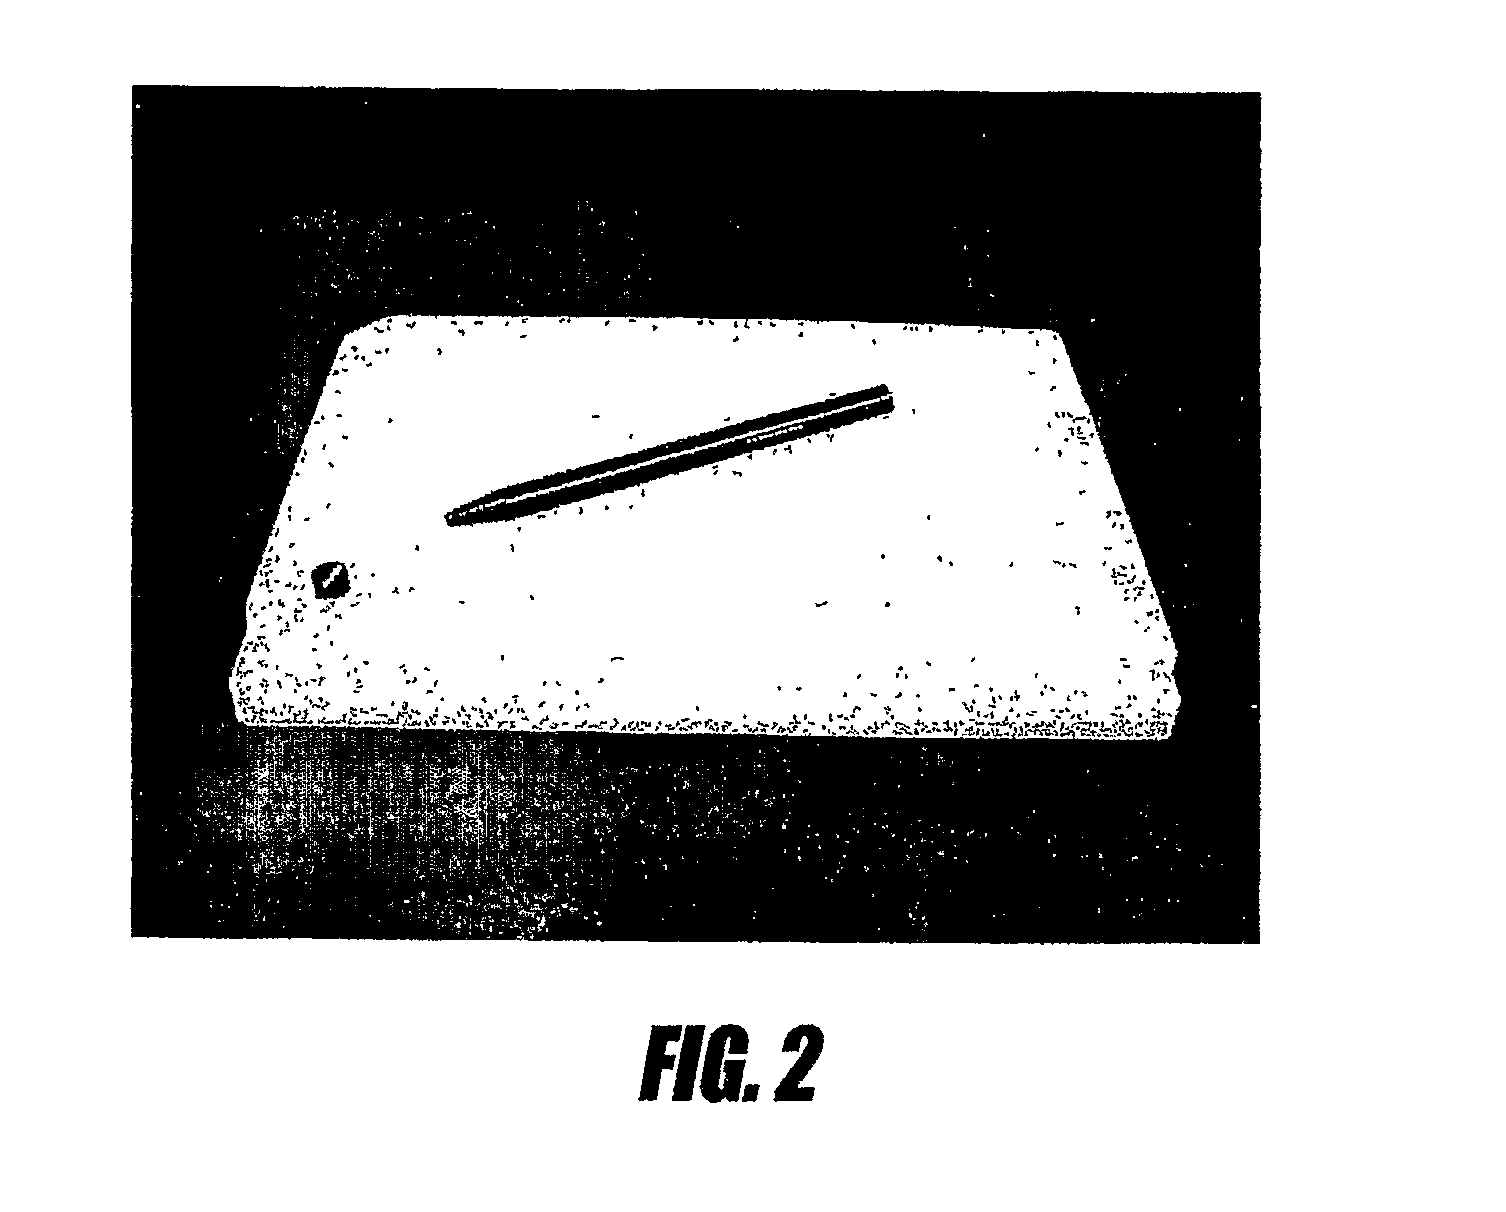 Method of minimizing reagent consumption in microplate-based reactions